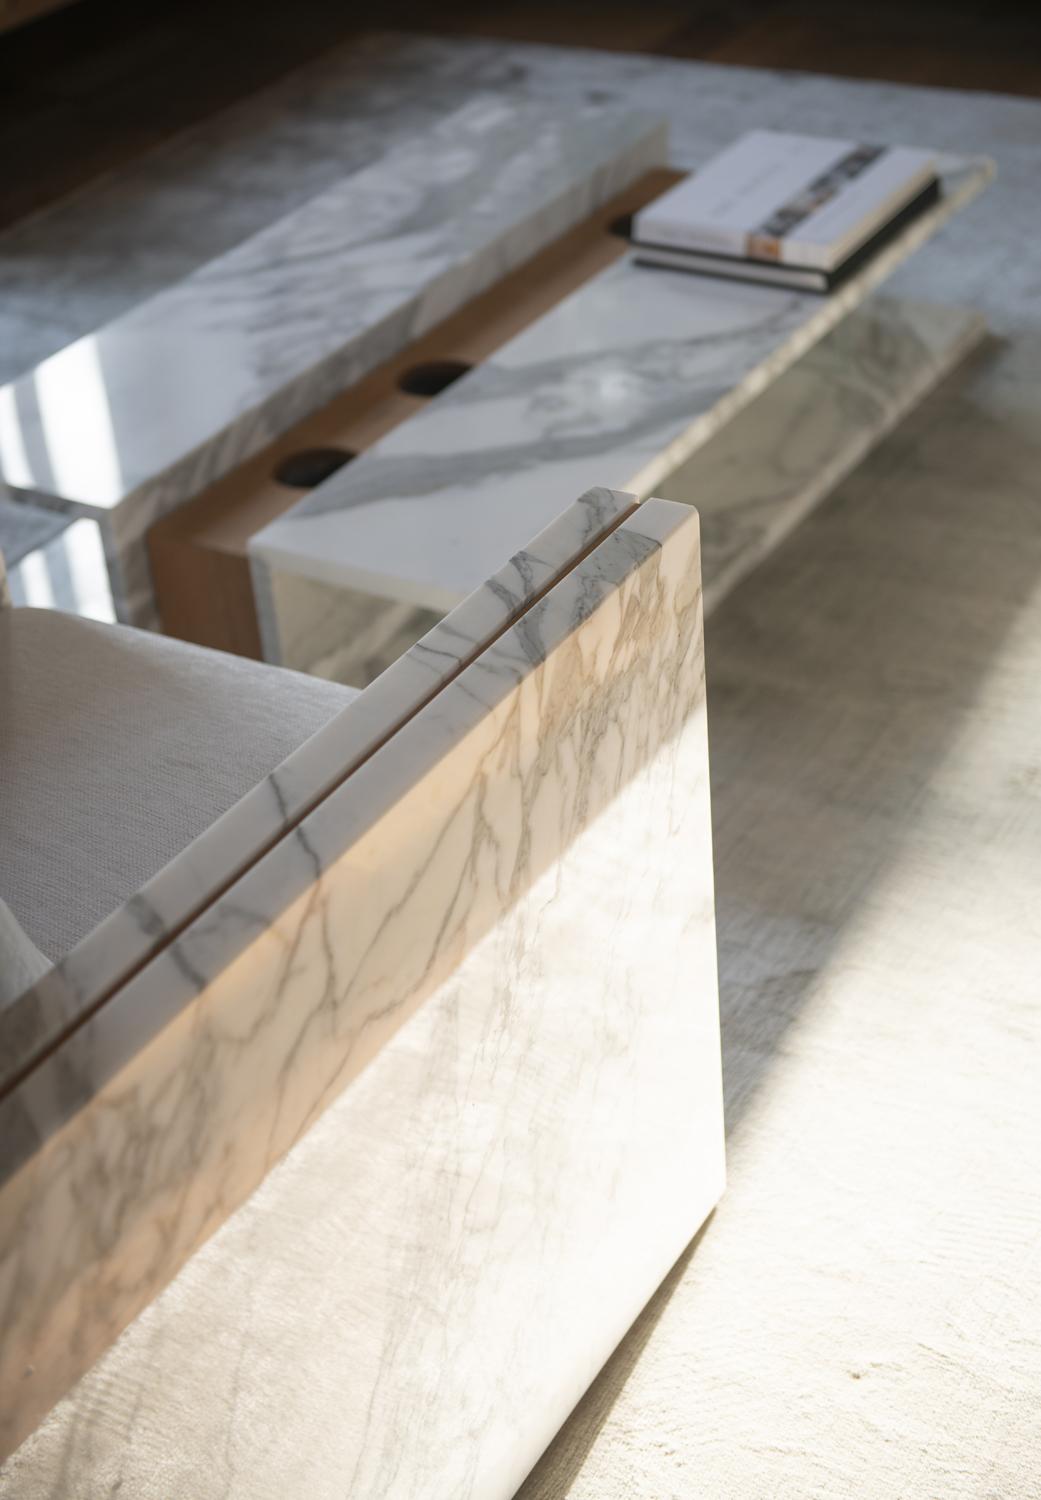 The Bettogli low table is designed to encourage socializing, with a place to put bottles of champagne to drink with friends. The fusion of three different sensory elements: marble, wood, and glass that match one another perfectly.
Bettogli Low